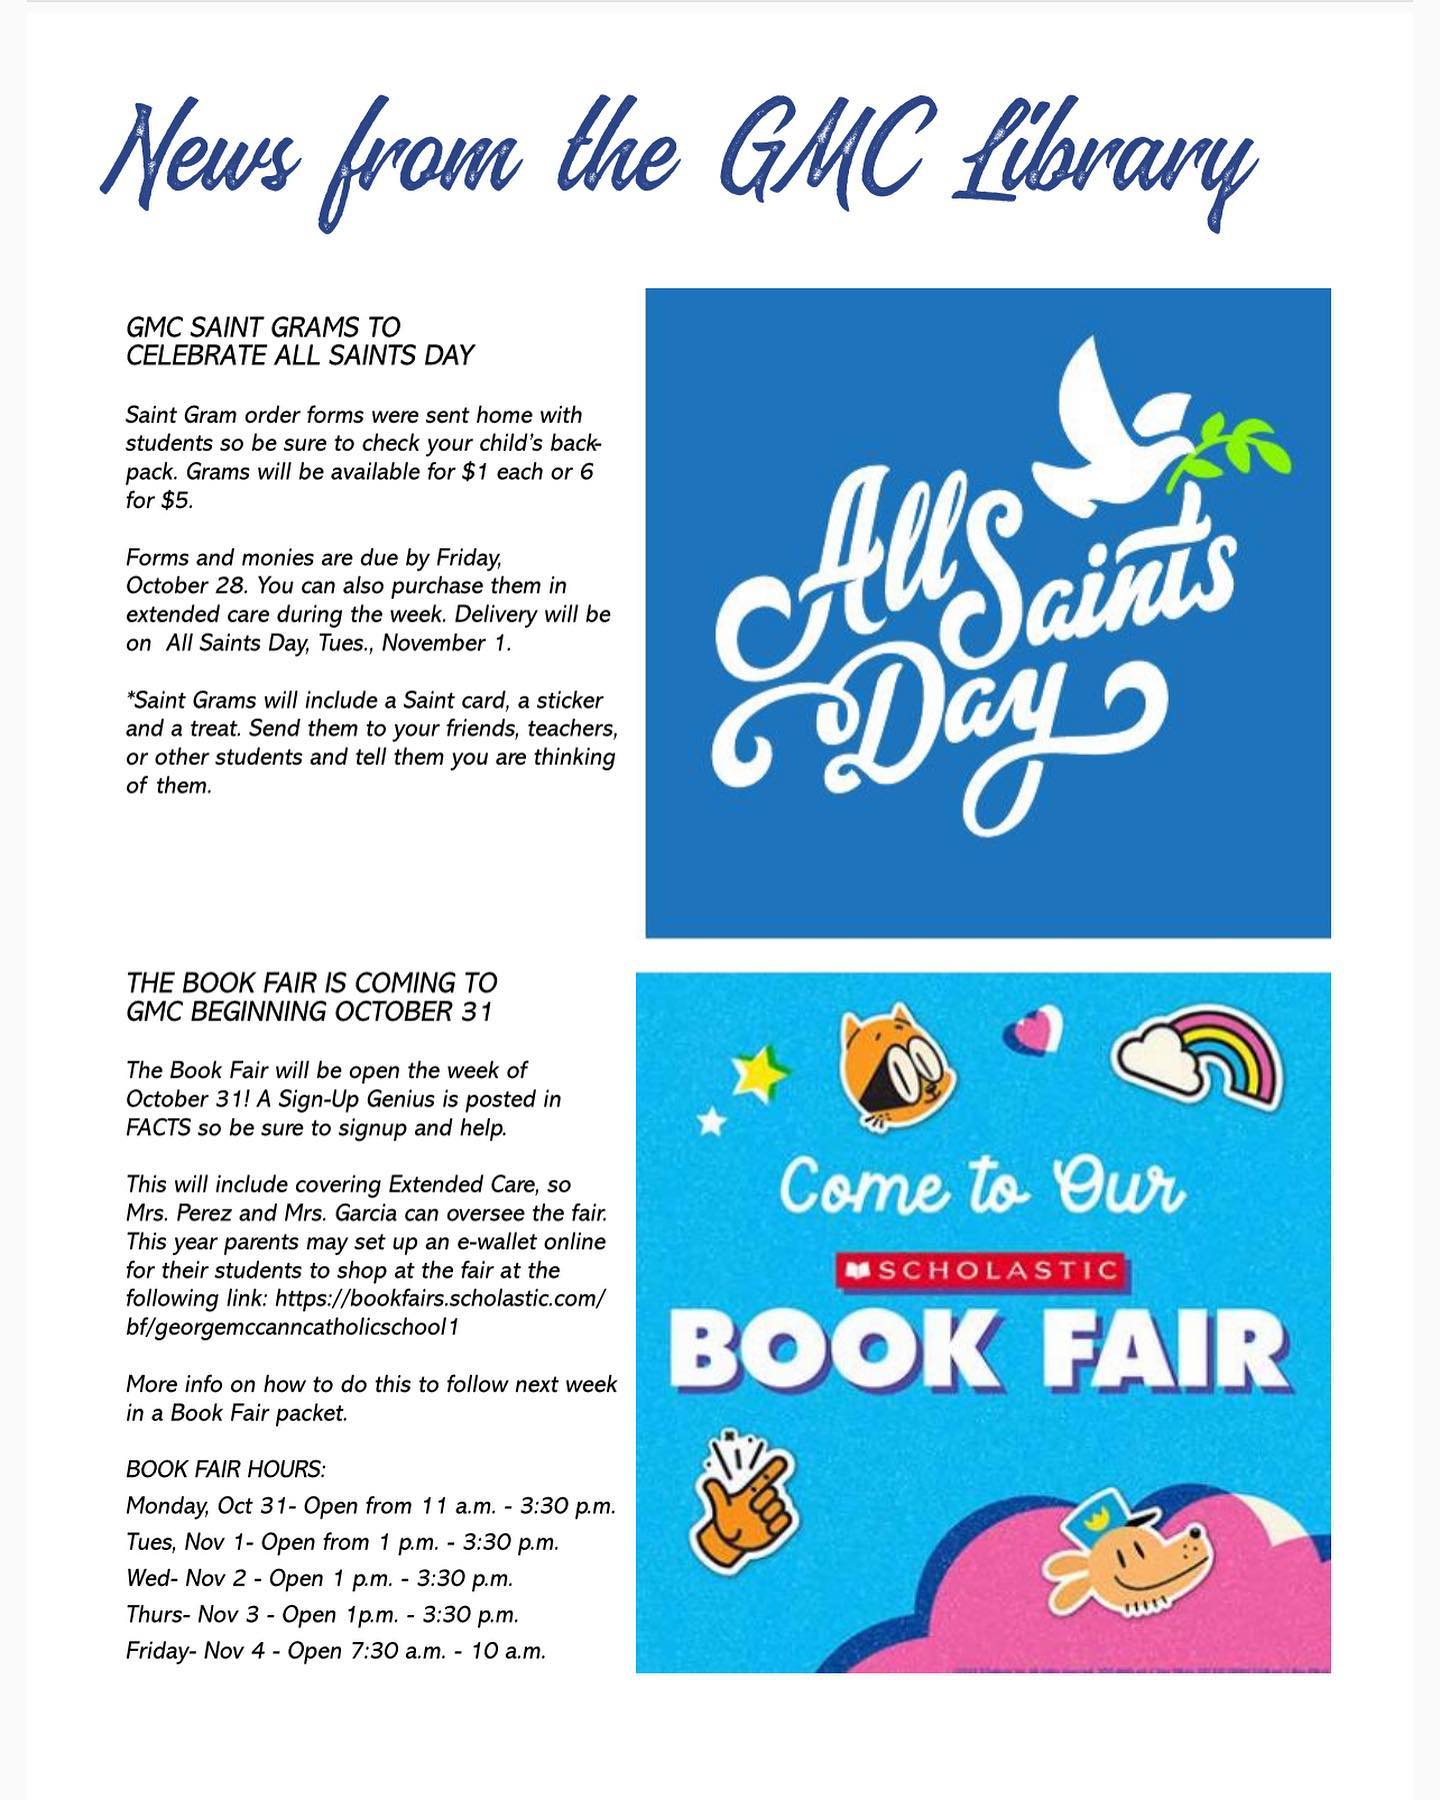 All Saints Day and Book Fair